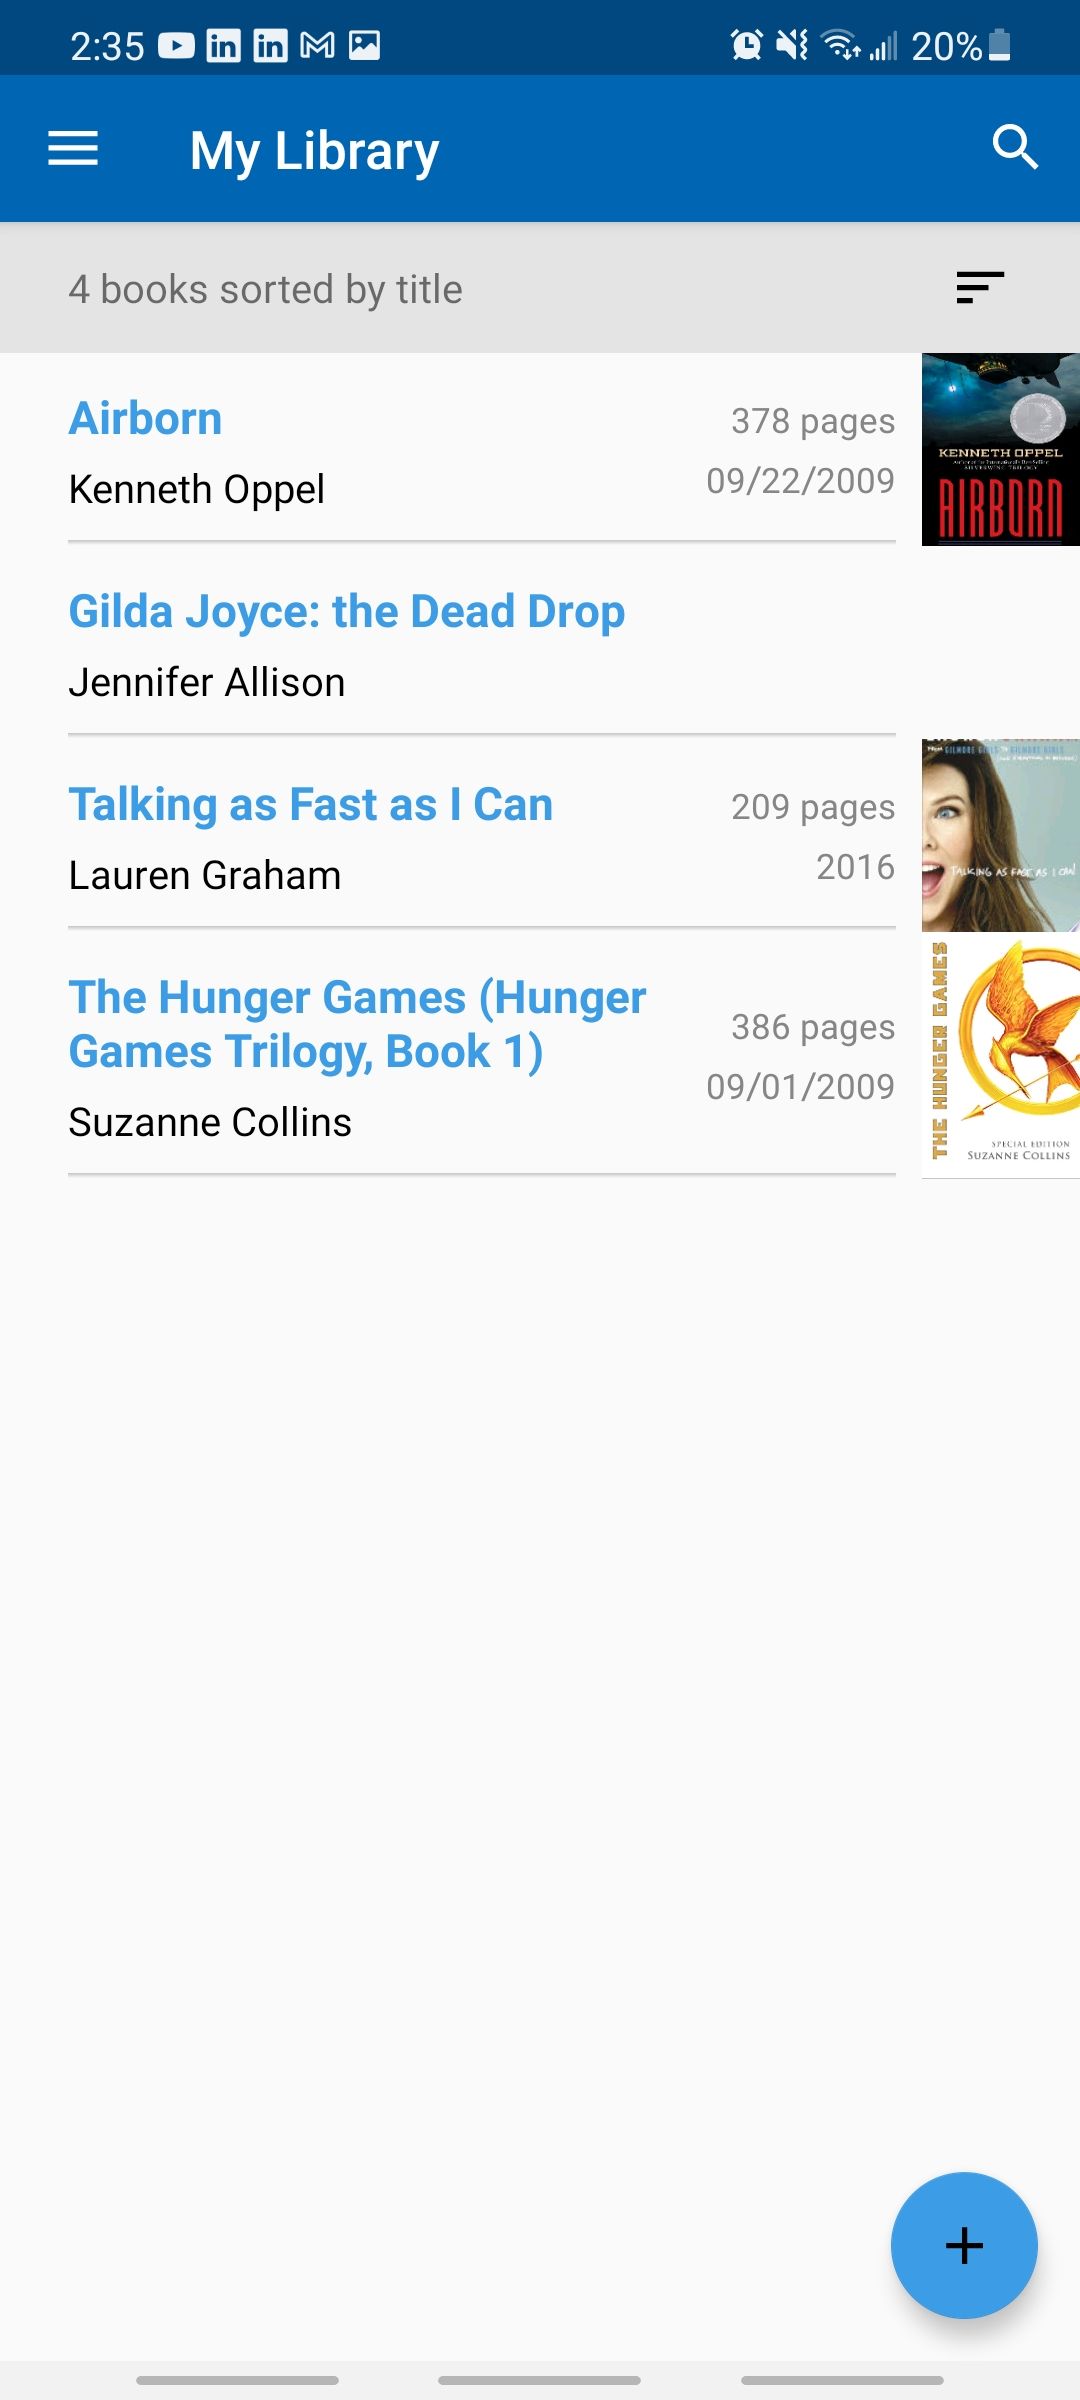 my library app showing my different books